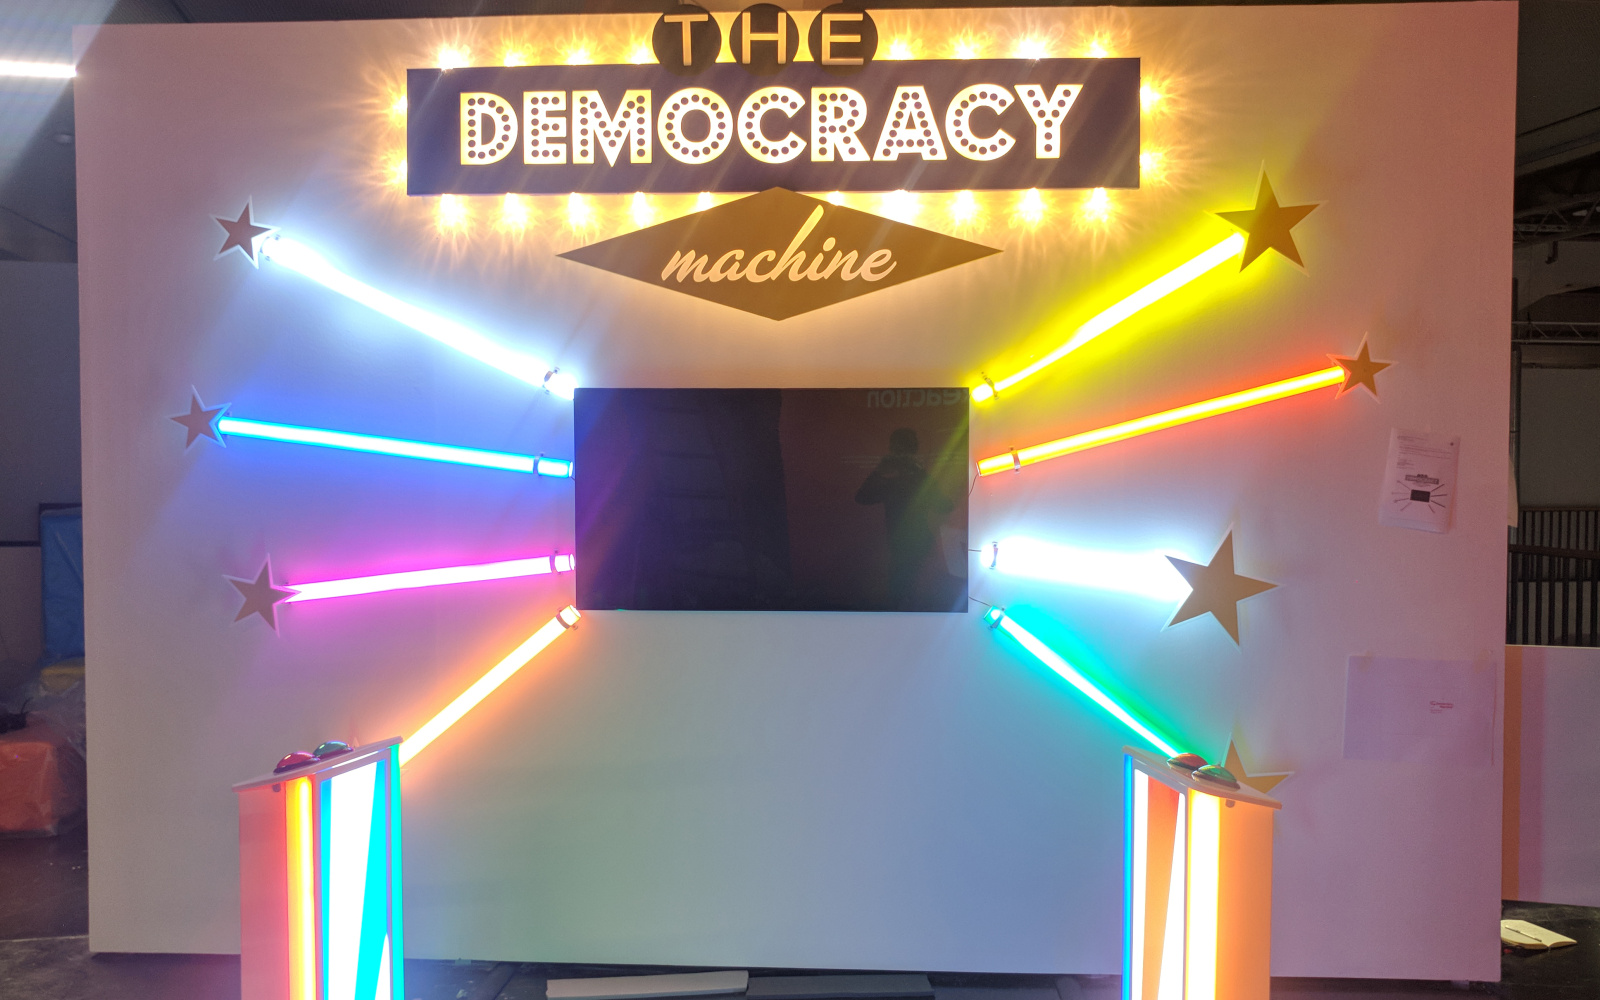 Front view of The Democracy Machine! In the middle of a wall is a television set installed around it, three colorful color tubes are arranged like sunbeams. In front of it are two podiums with buttons.